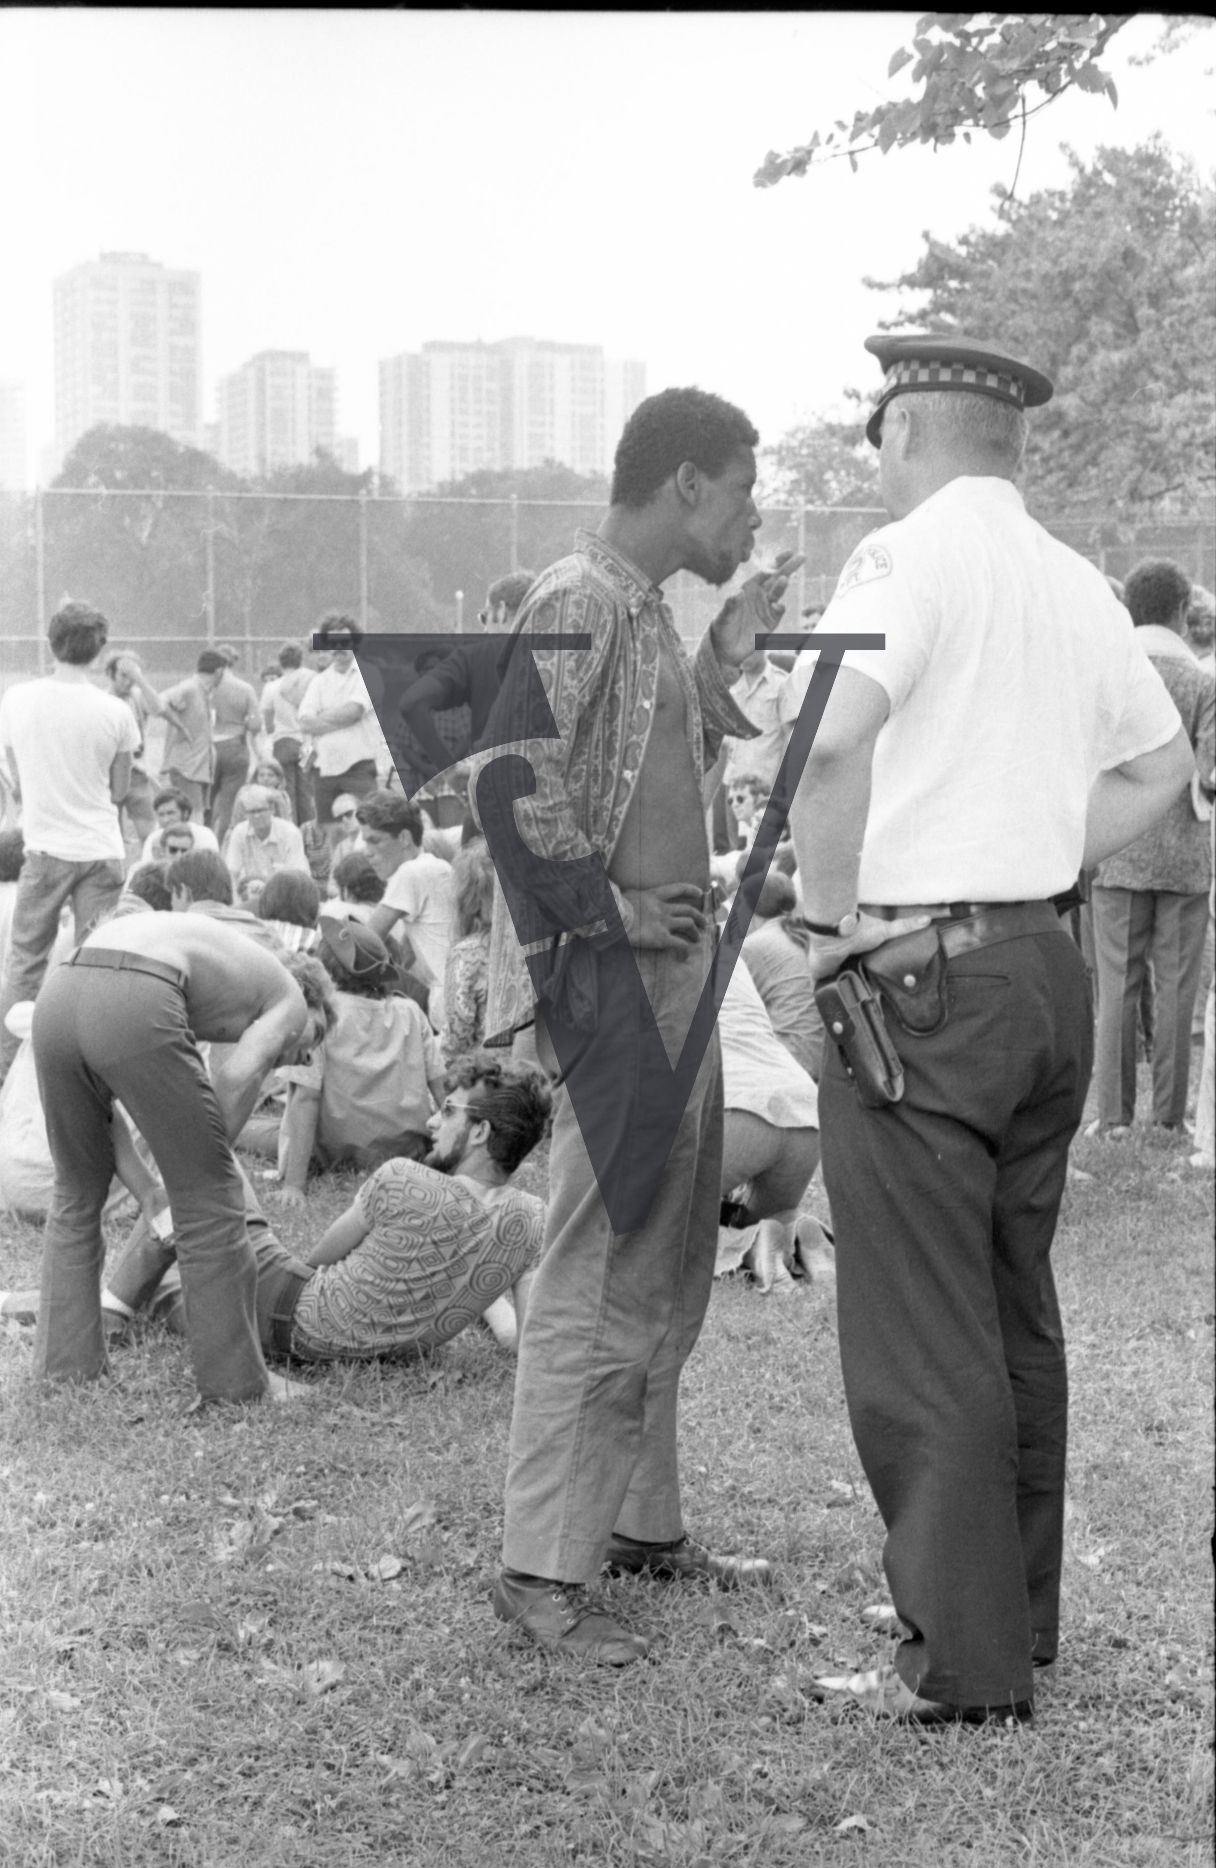 Chicago, Anti-war rallies in Lincoln Park, man talks to to police officer, smokes cigarette.